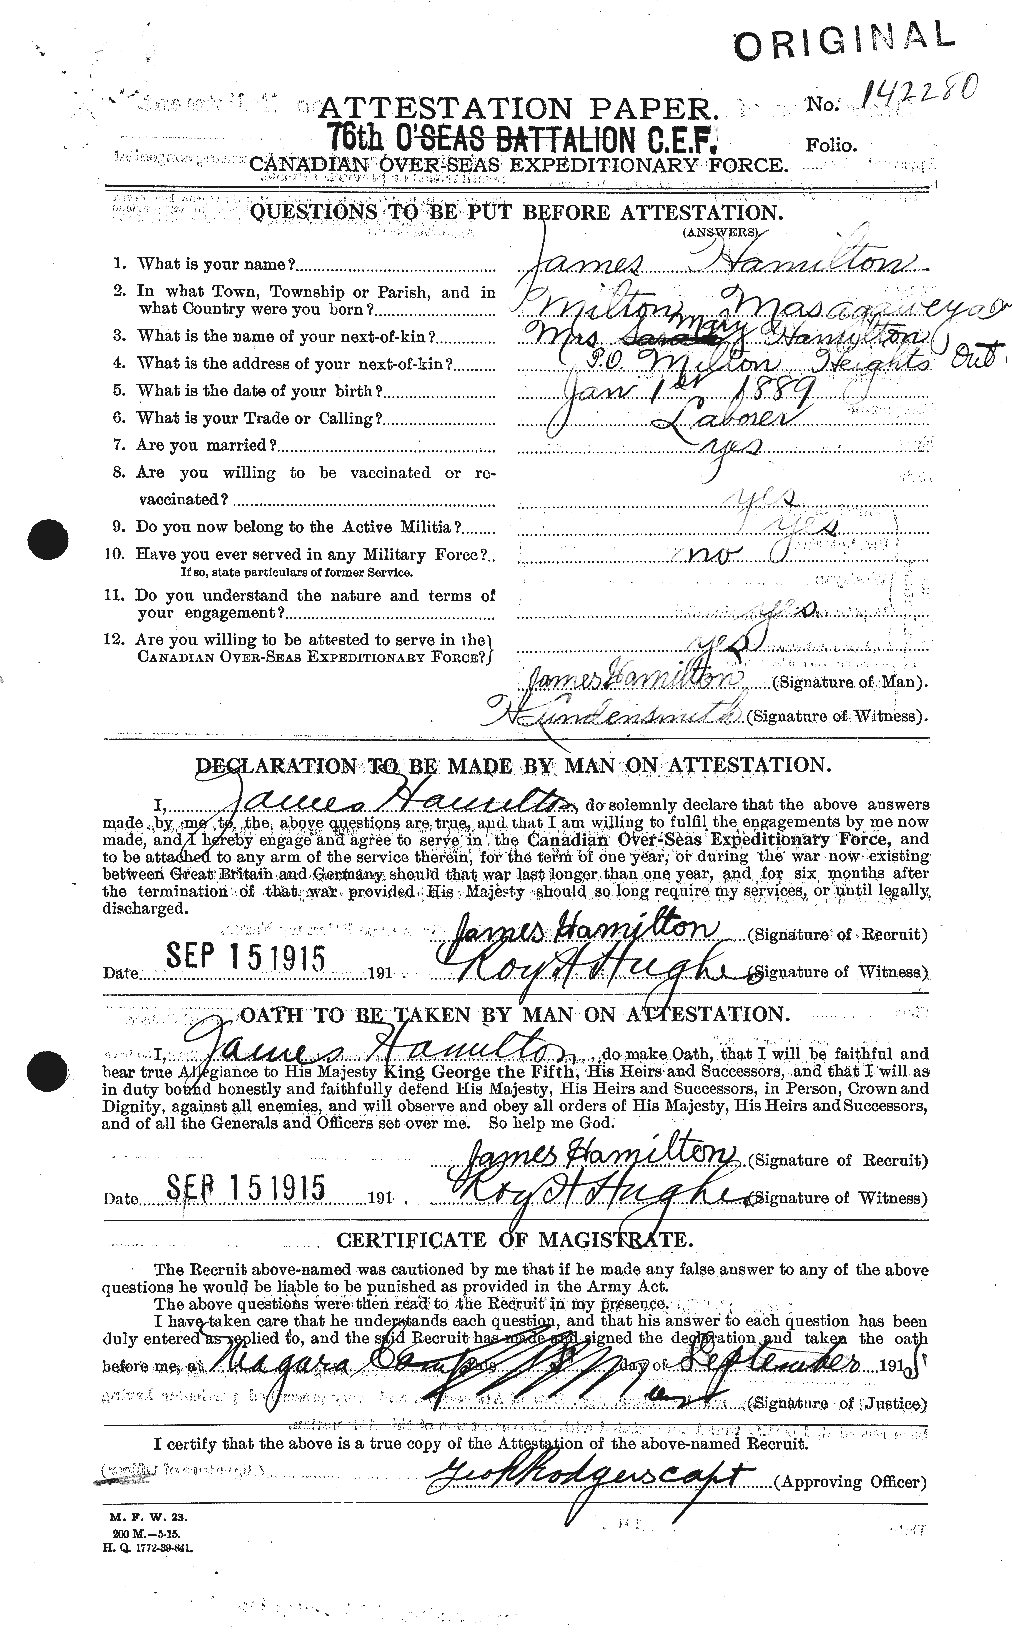 Personnel Records of the First World War - CEF 372947a